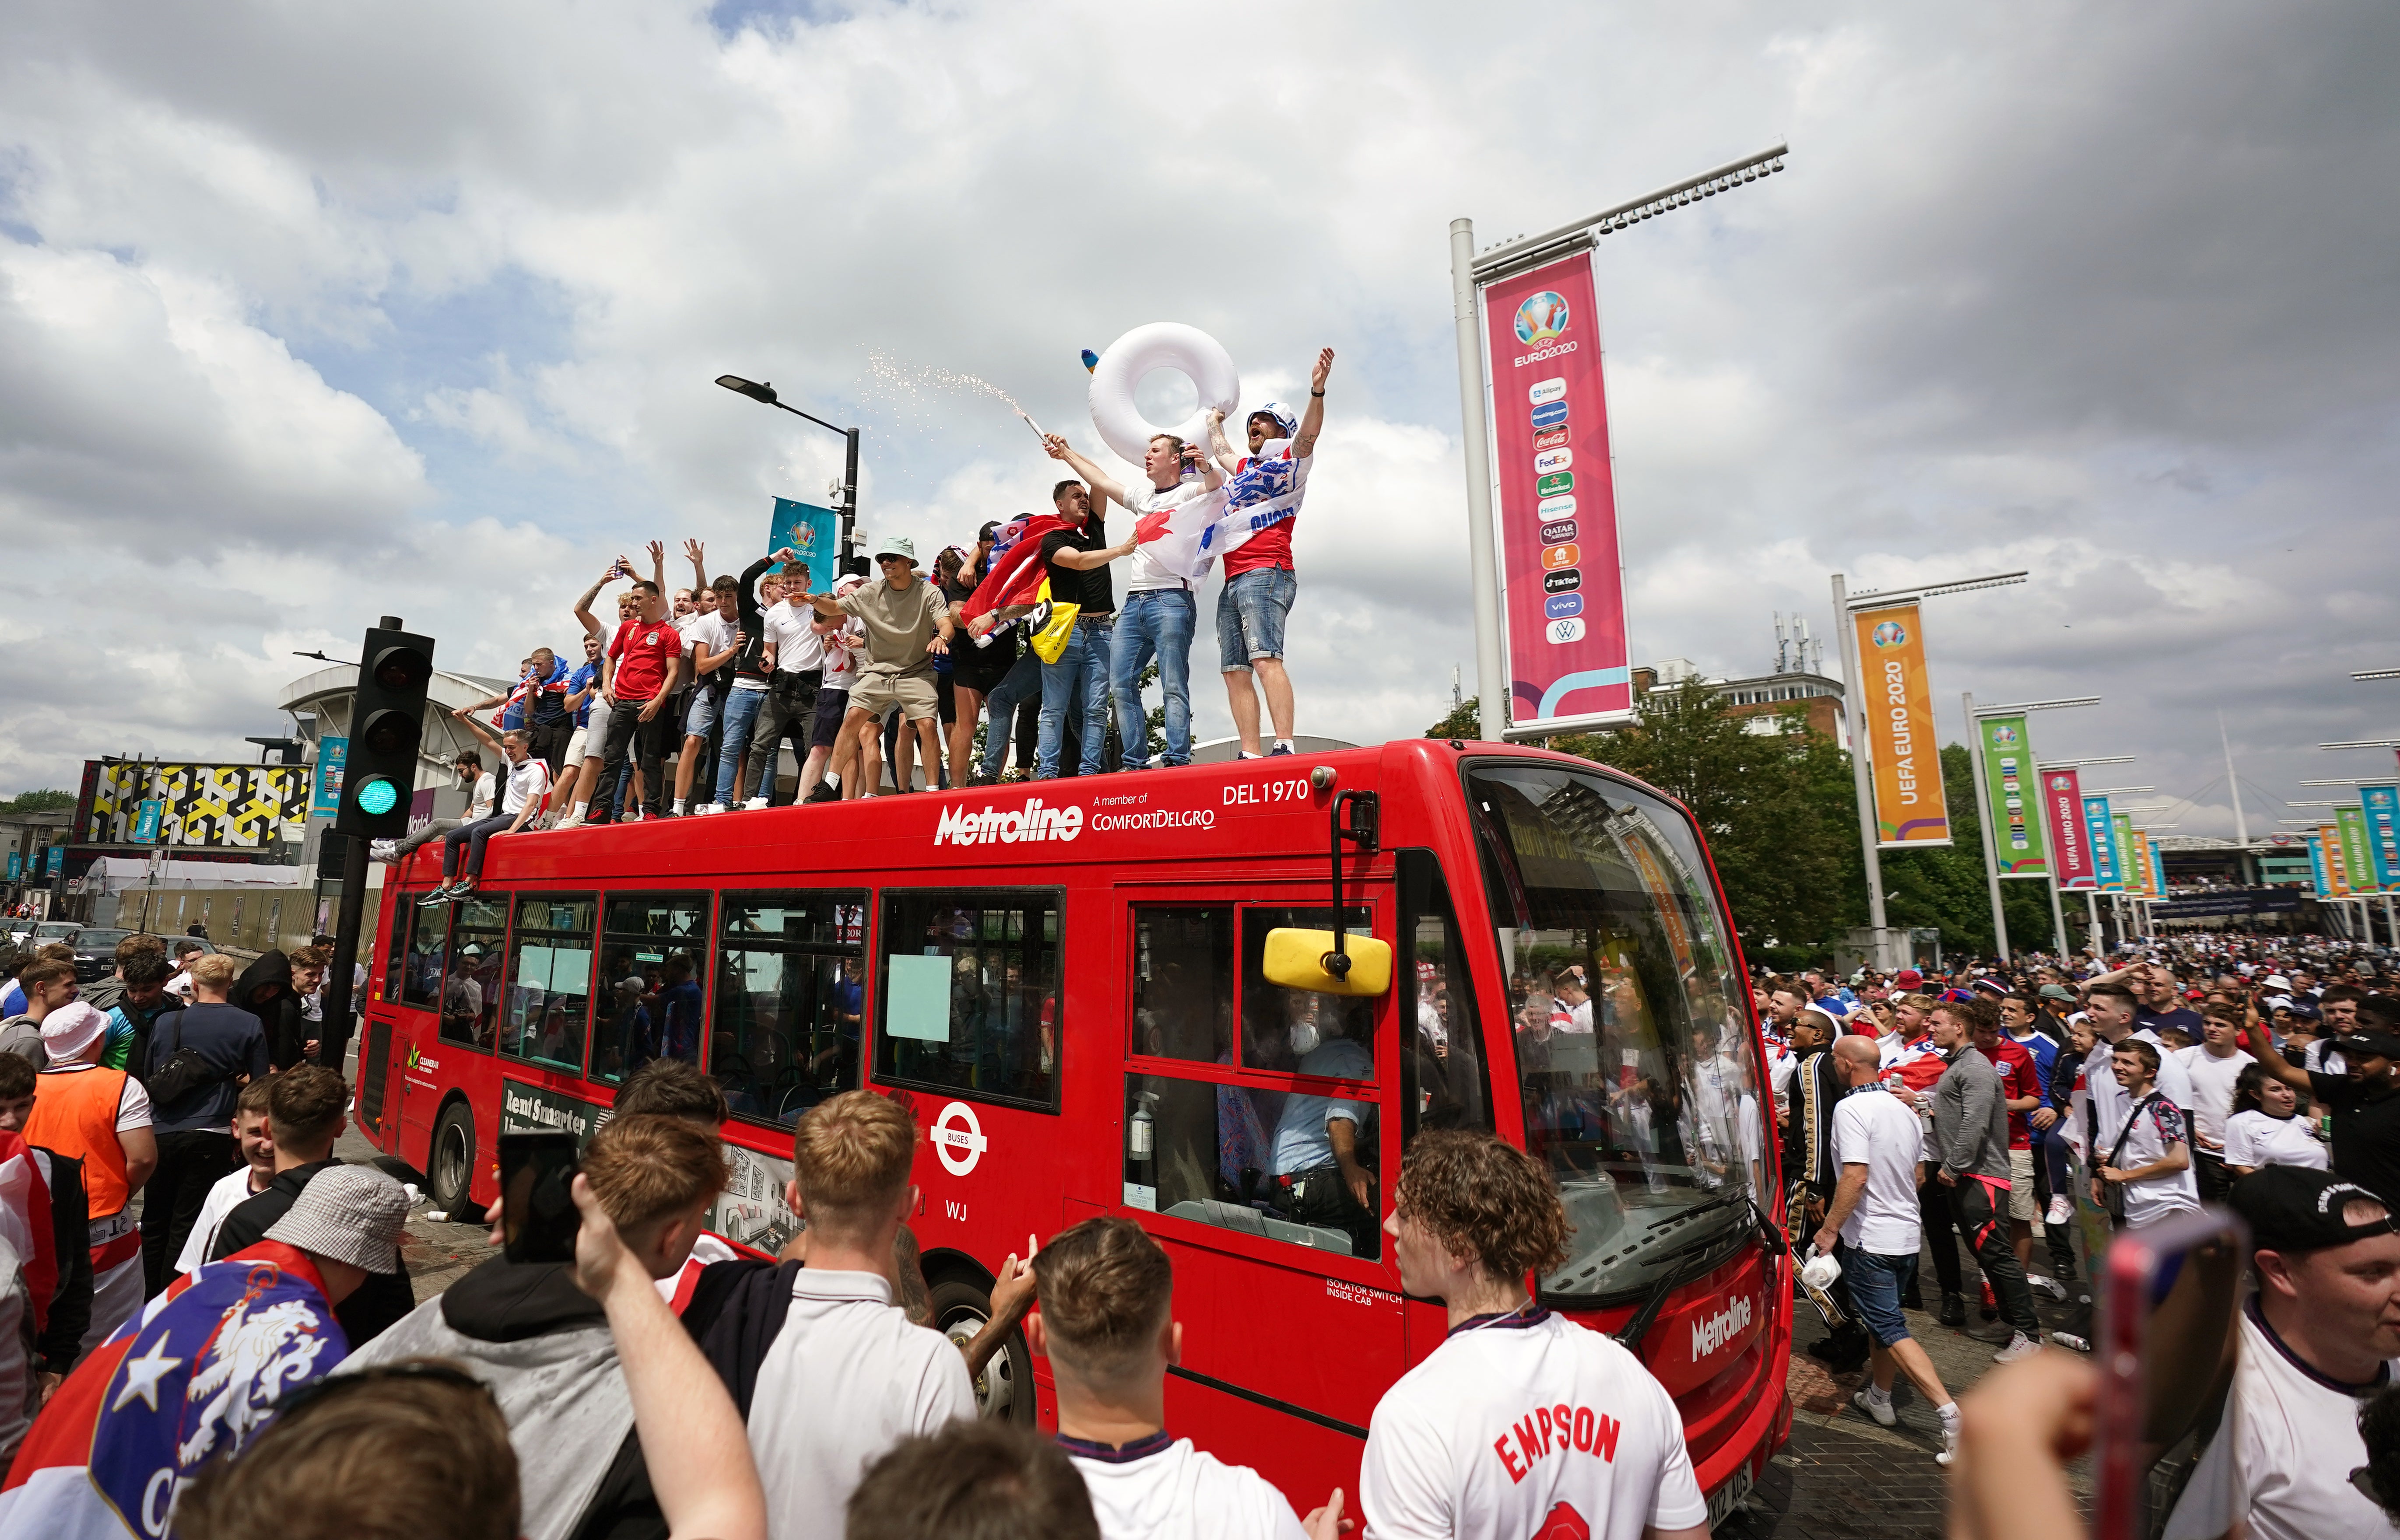 England fans climb aboard a bus outside the ground ahead of the Euro 2020 final at Wembley. The day was marred by crowd trouble with ticketless thugs storming into the stadium before kick-off (Zac Goodwin/PA)